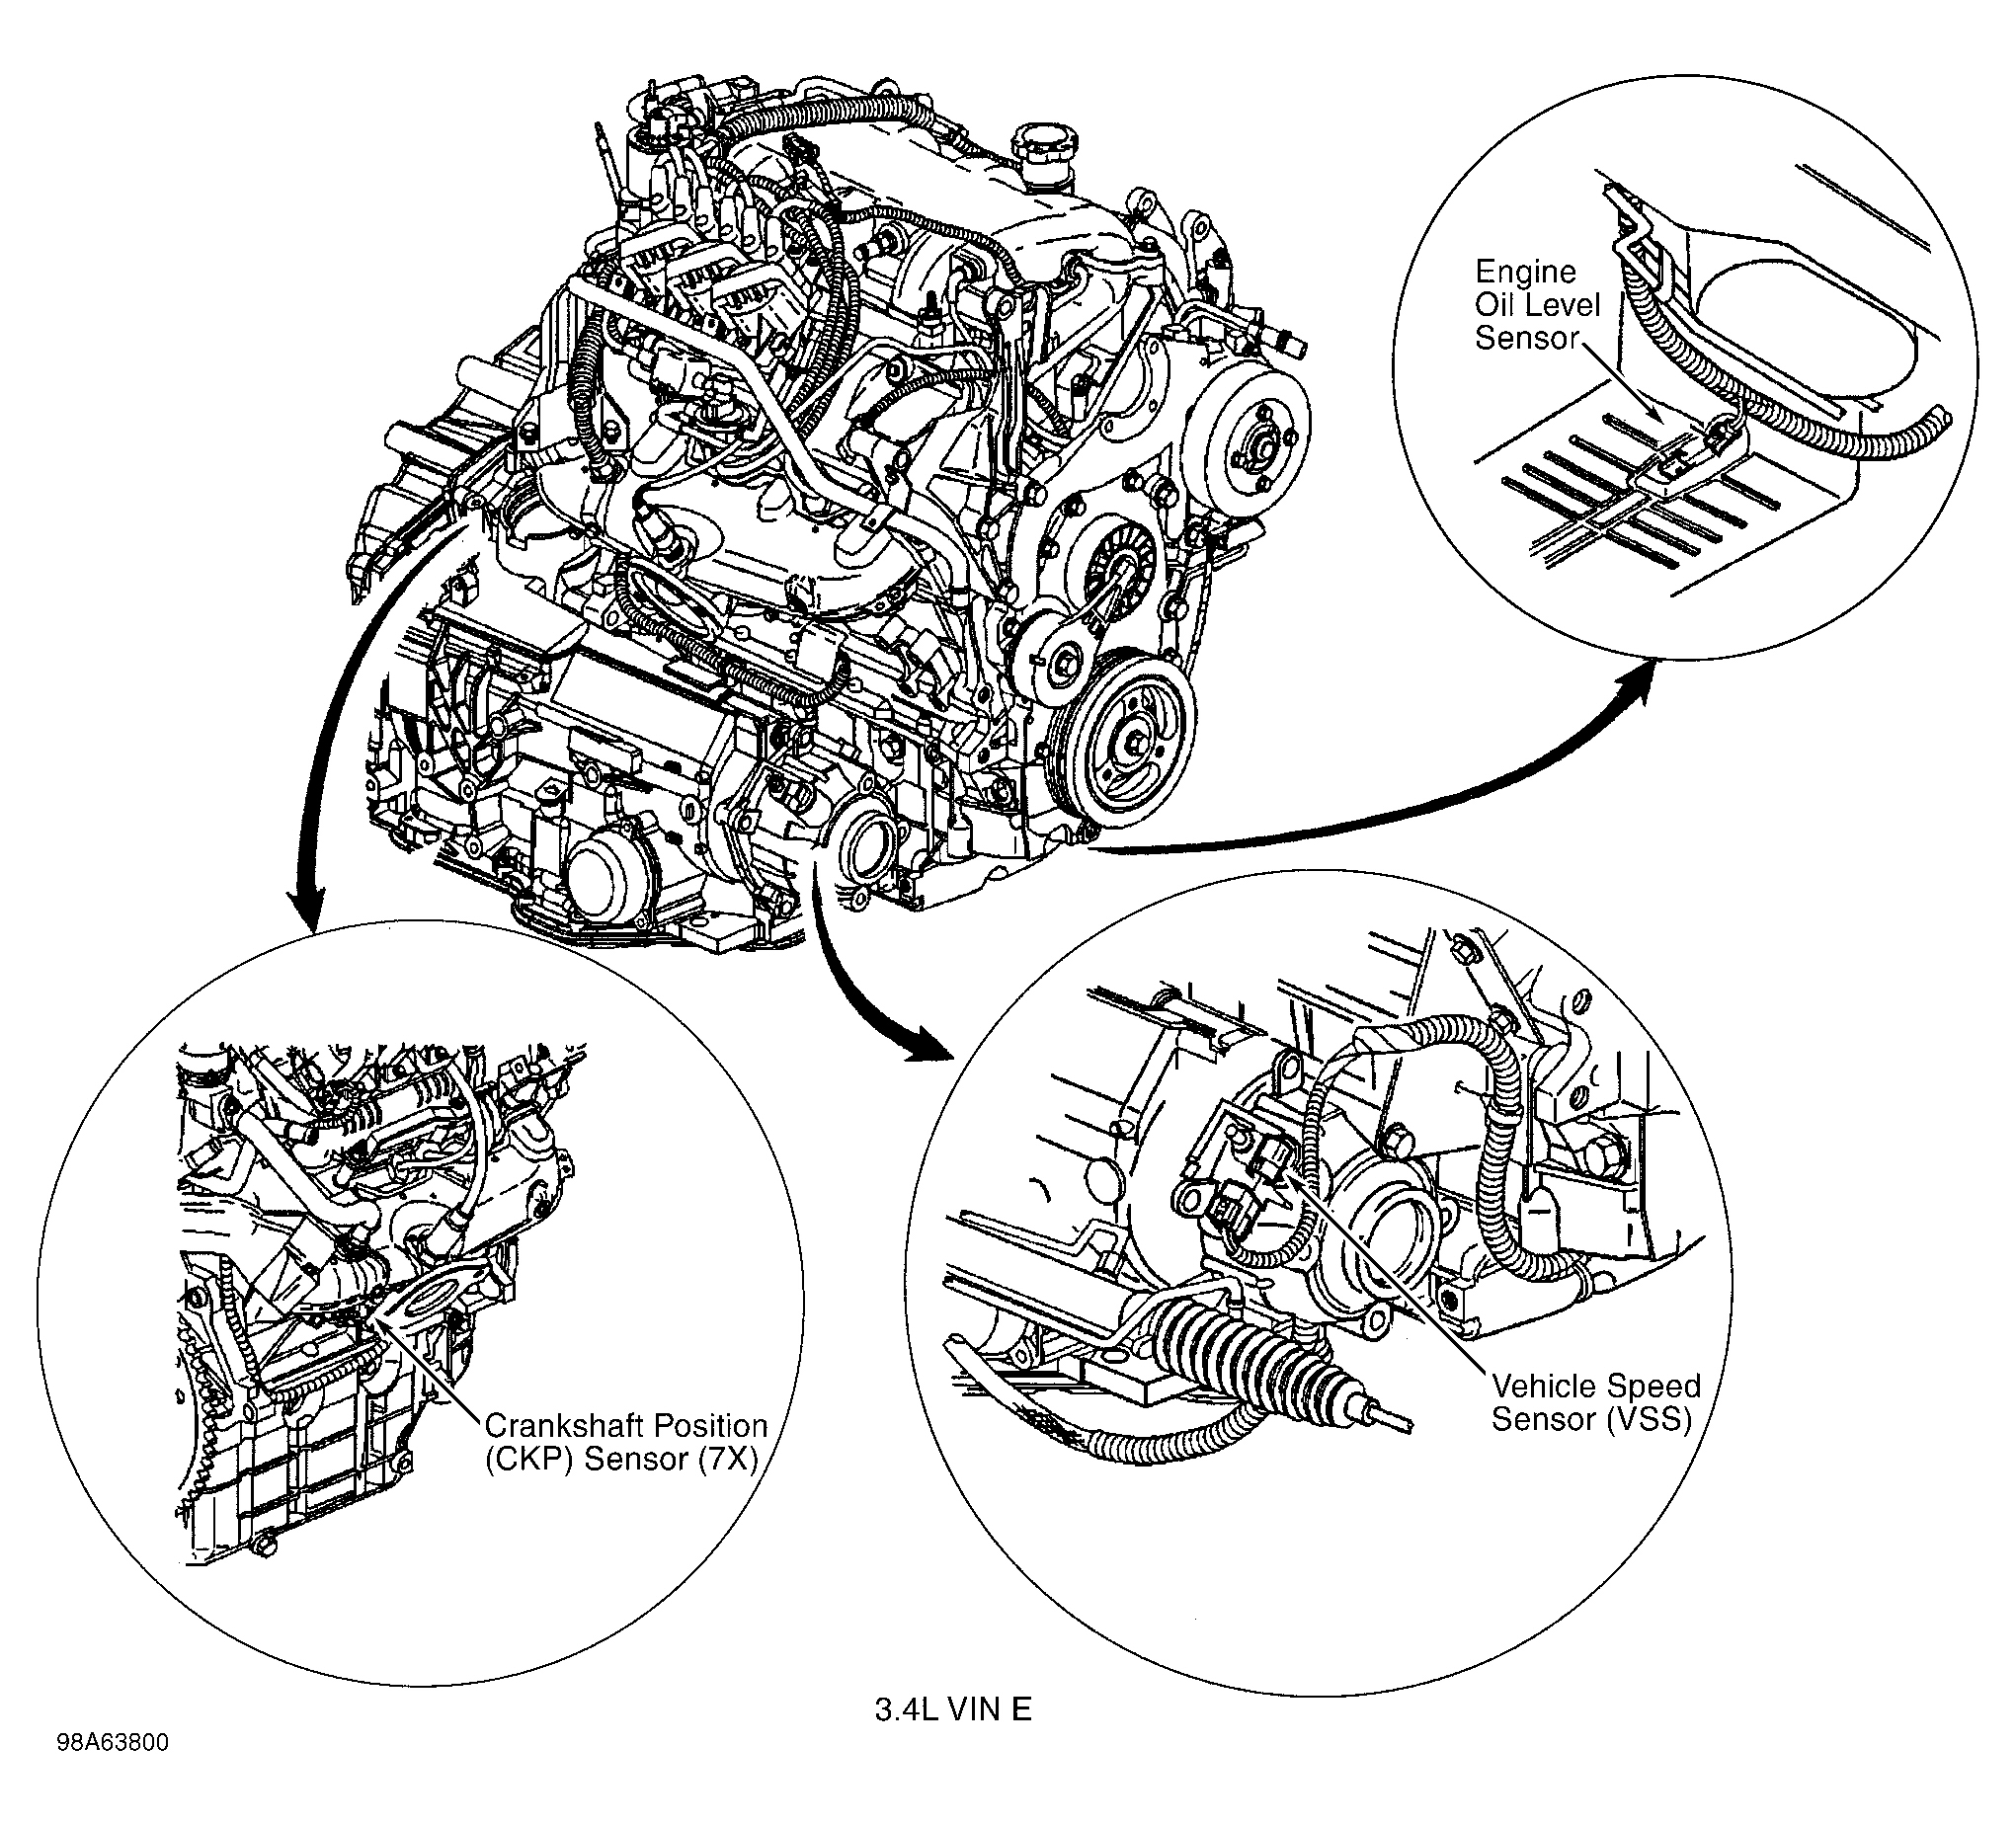 Chevrolet Impala 2000 - Component Locations -  Right Side Of Engine (3.4L VIN E)